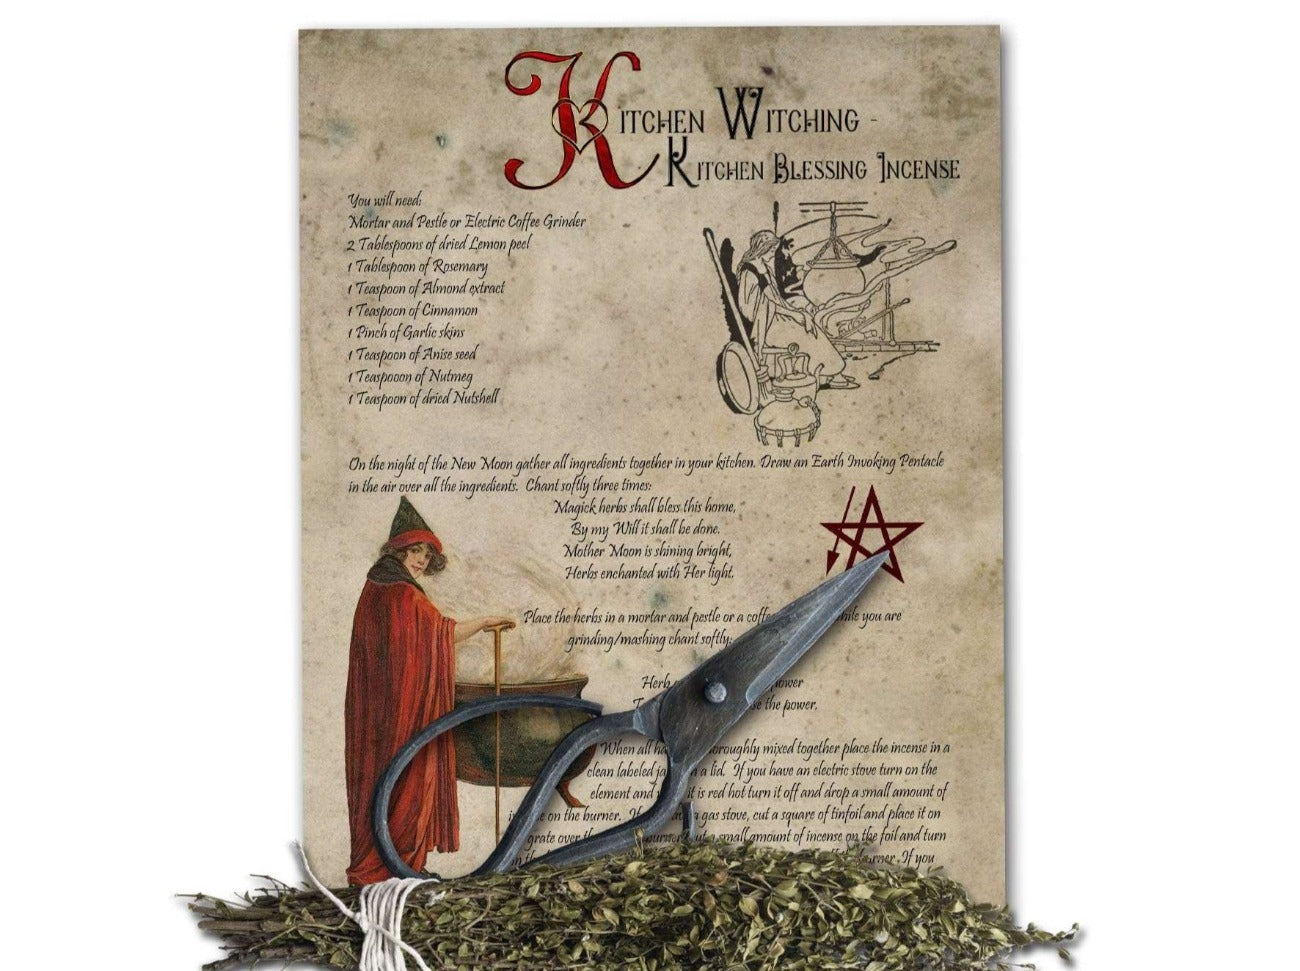 KITCHEN BLESSING INCENSE Kitchen Witching Printable Page - Morgana Magick Spell